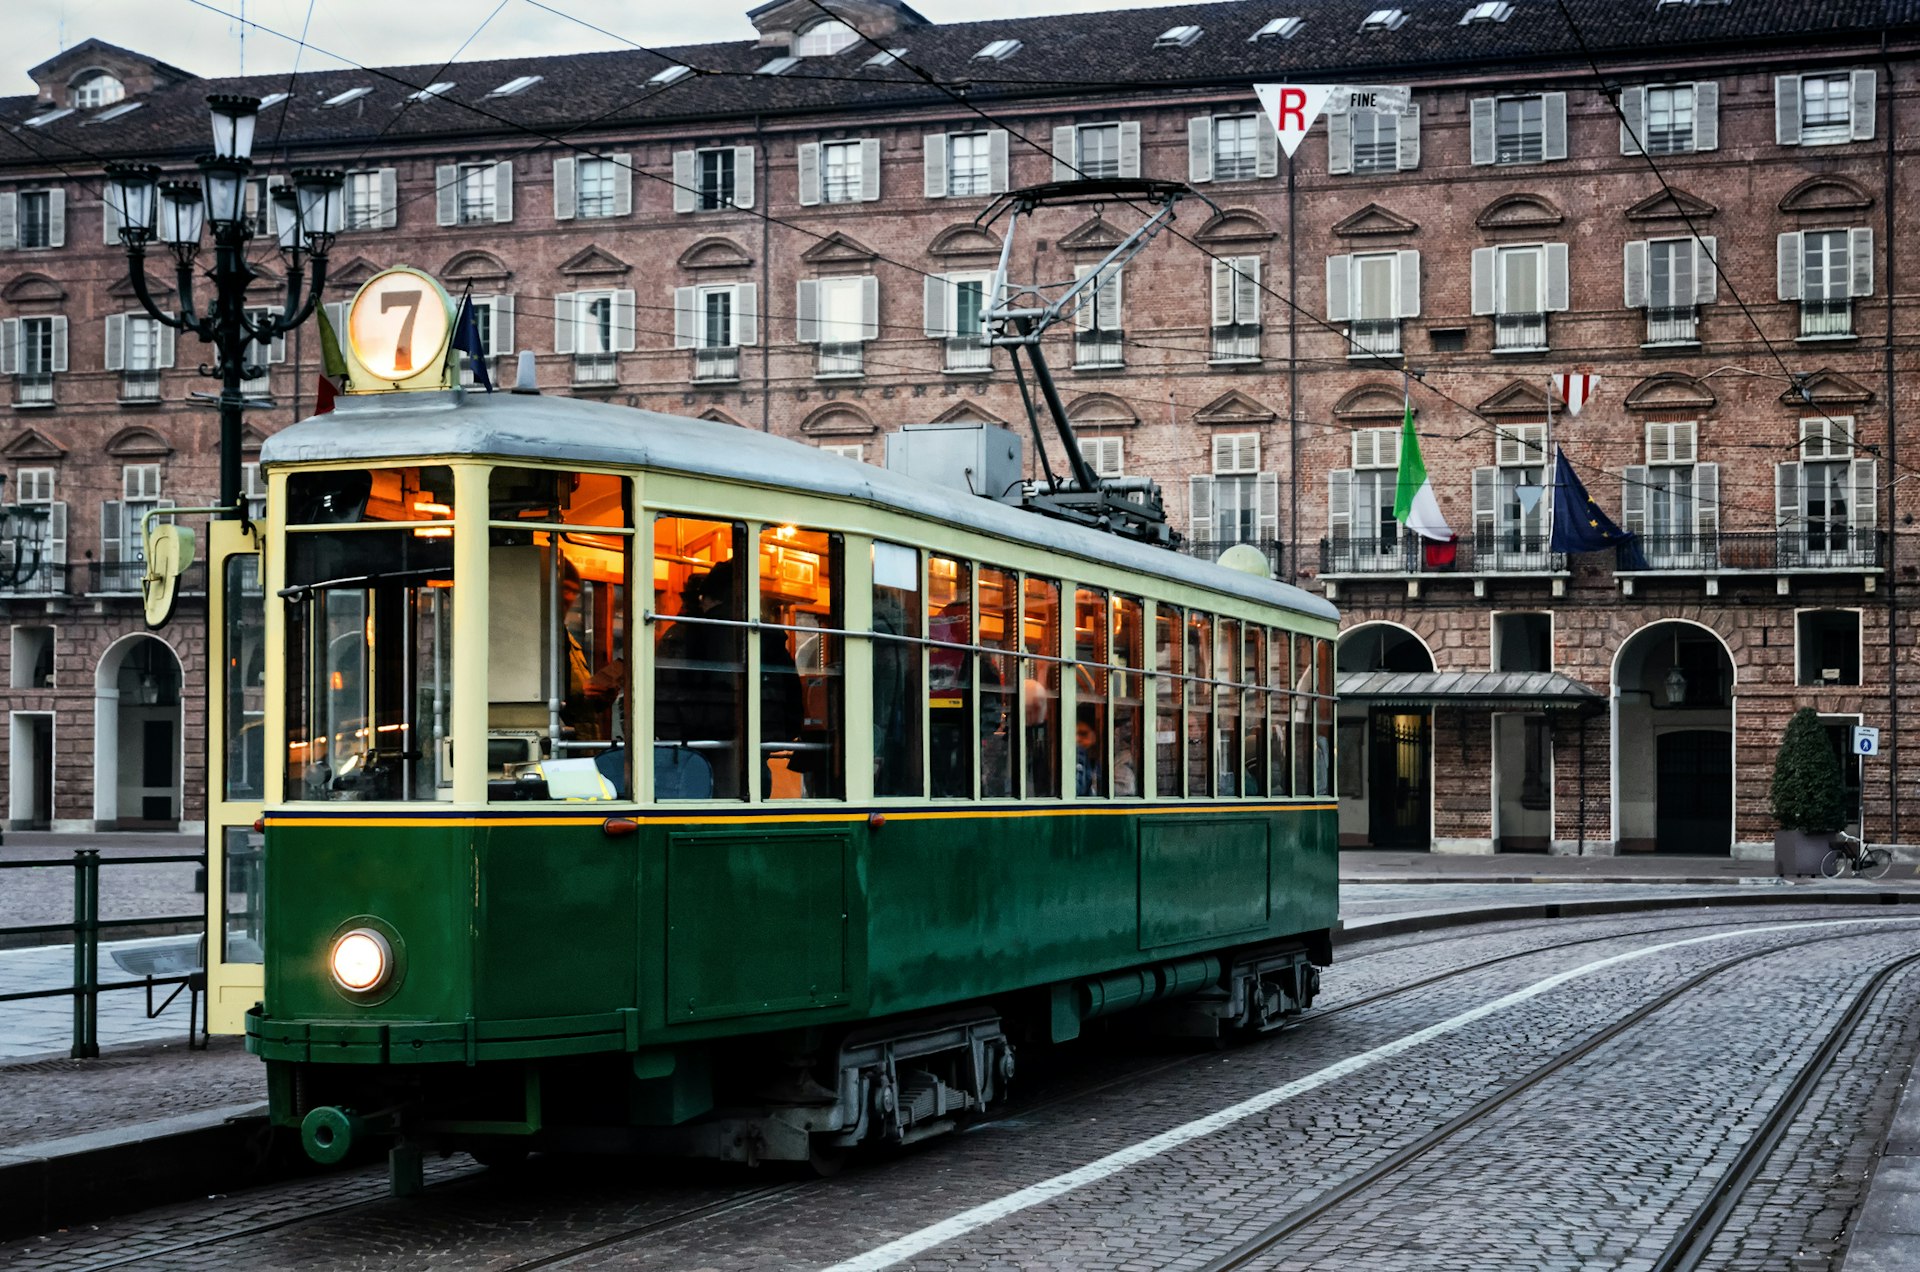 An historical tram in Turin (Italy) passing through the city center